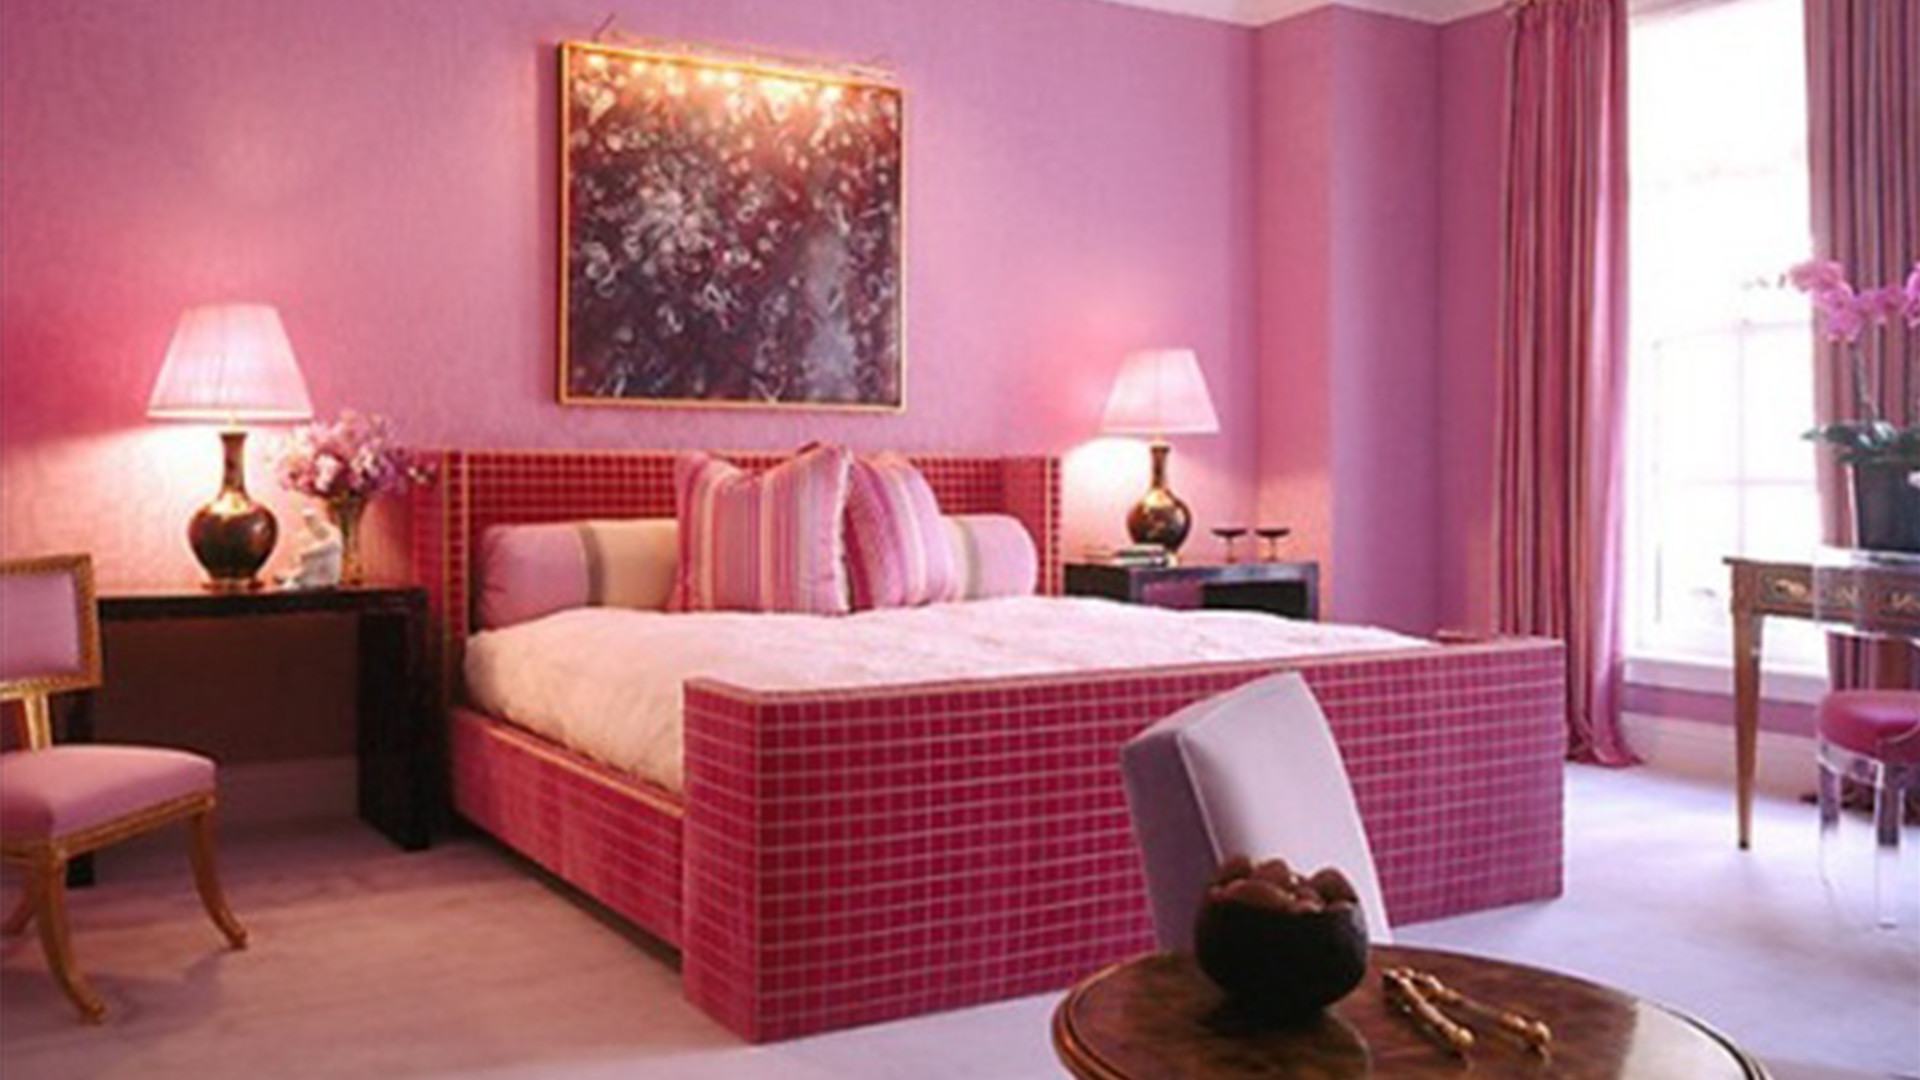 1920x1080 Bedroom Medium Decorating Ideas For Teenage Girls On A Expansive Budget  Limestone Throws Table Lamps. ...